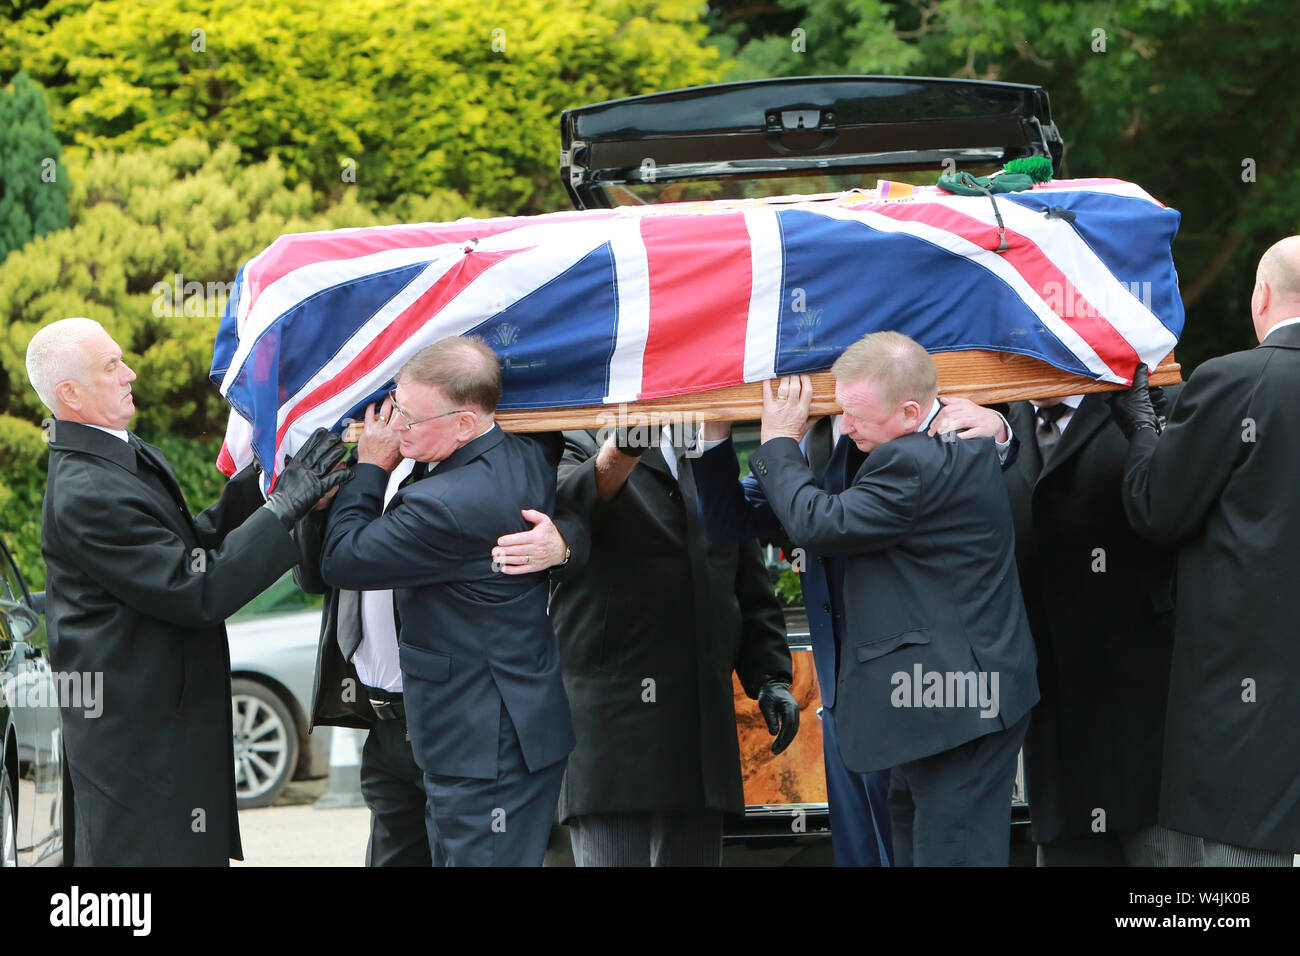 Joe Frazer (front left) helps carry the coffin of his brother Willie for the funeral service at Five Mile Hill Full Gospel Fellowship Church on the Maytown Road, County Armagh, Monday July 1st, 2019. (Photo by Paul McErlane for the Belfast Telegraph) Stock Photo